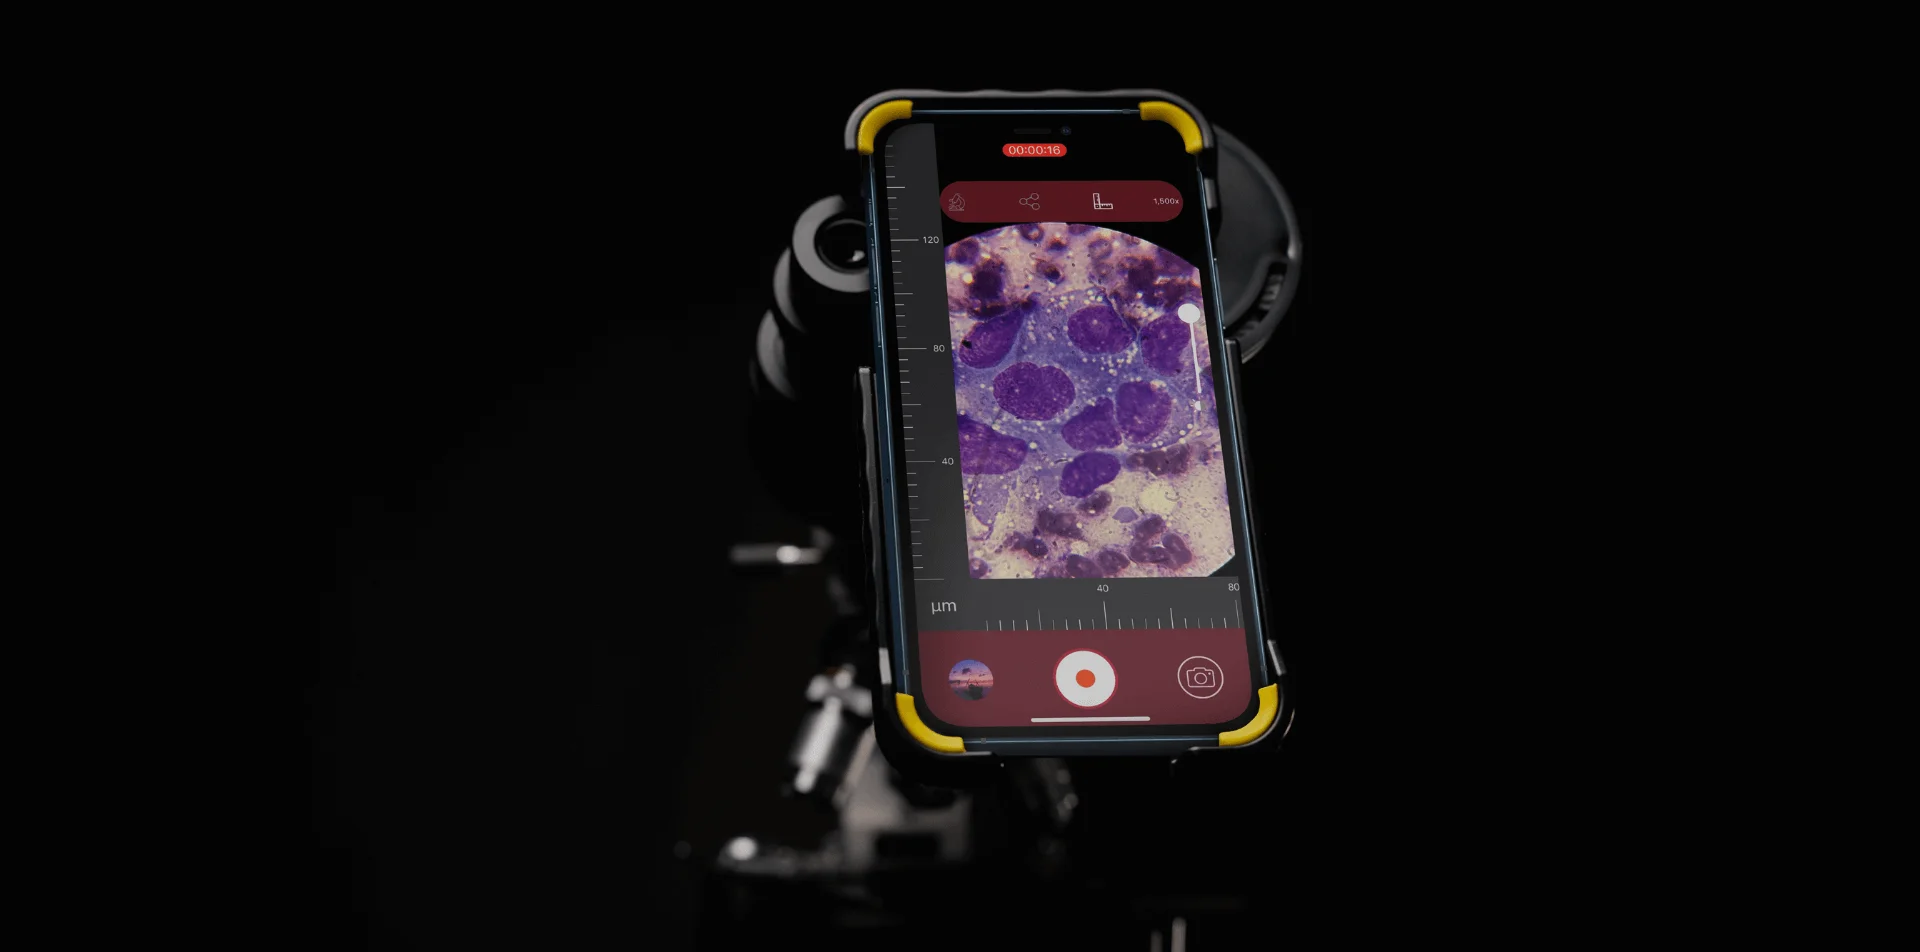 Phoneskope adapter with Microscope and Phone